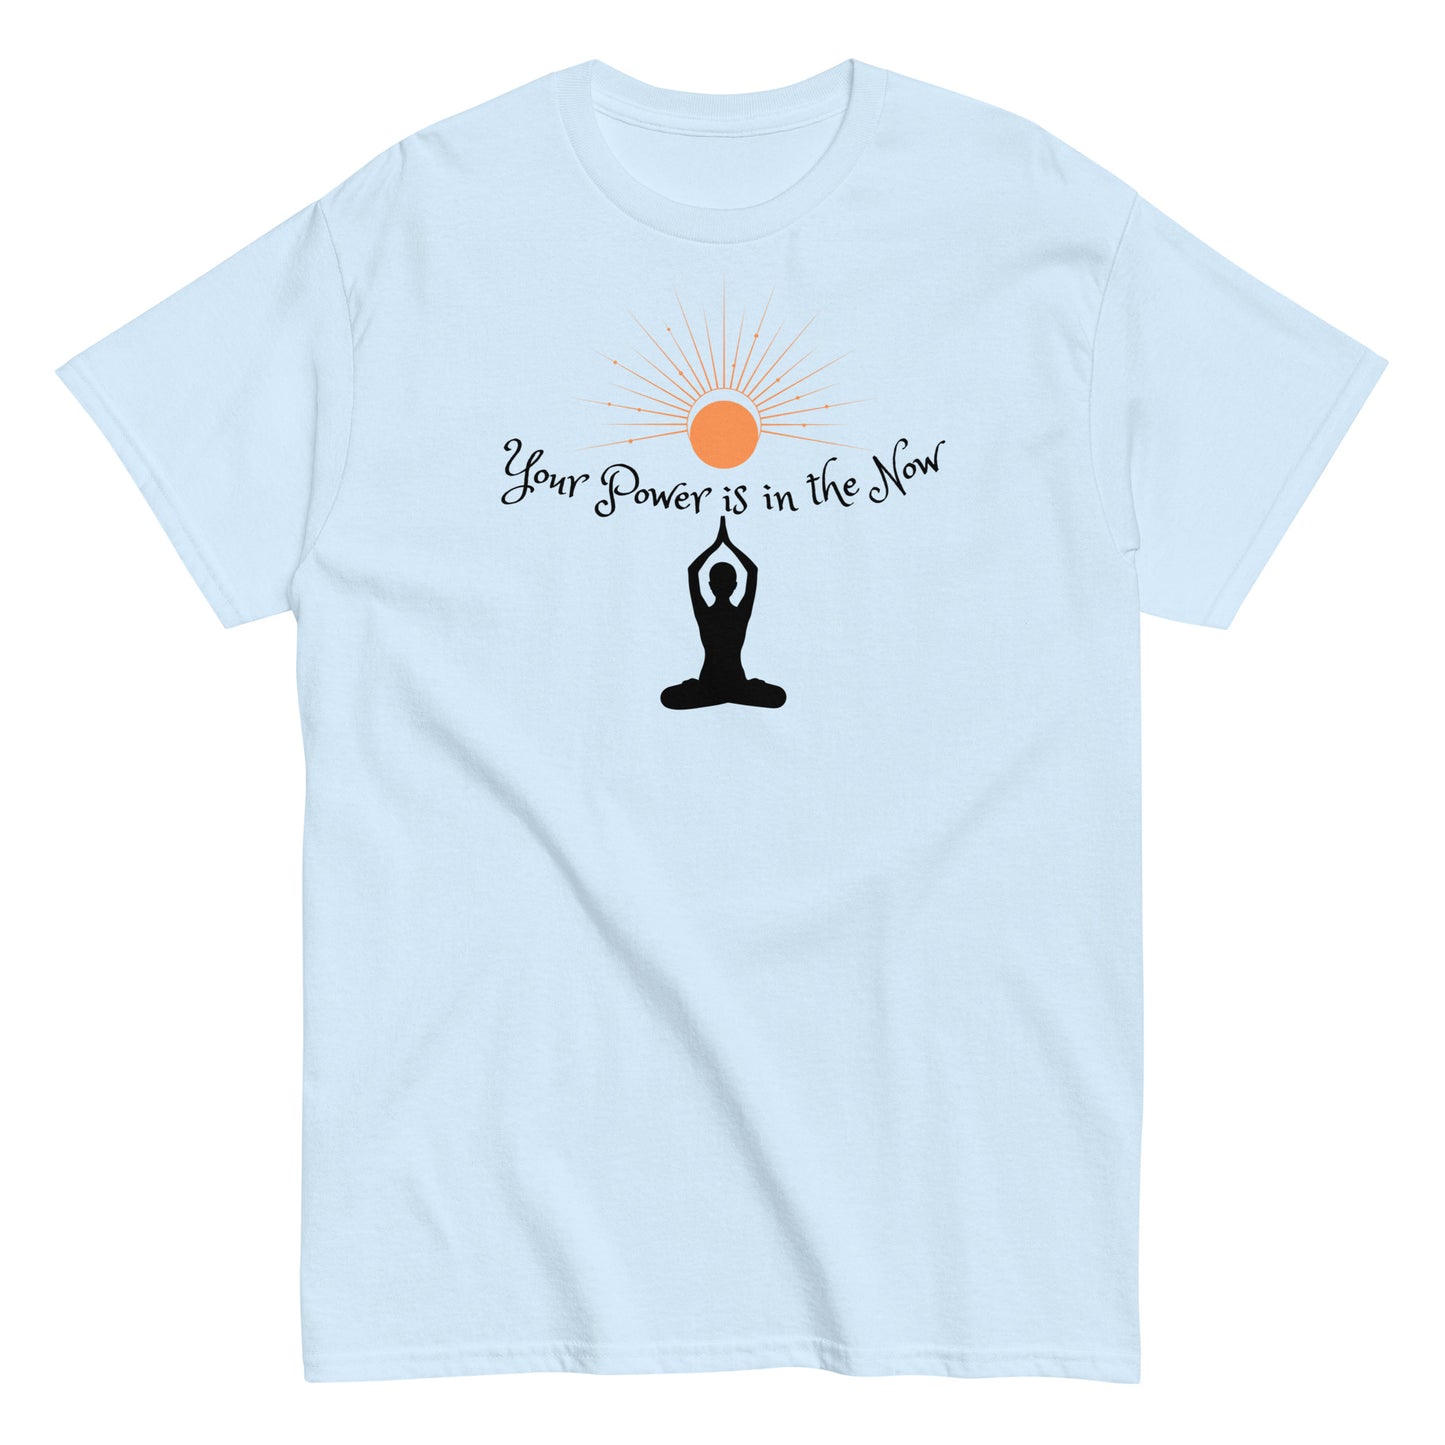 Your Power is in the Now Unisex T-Shirt